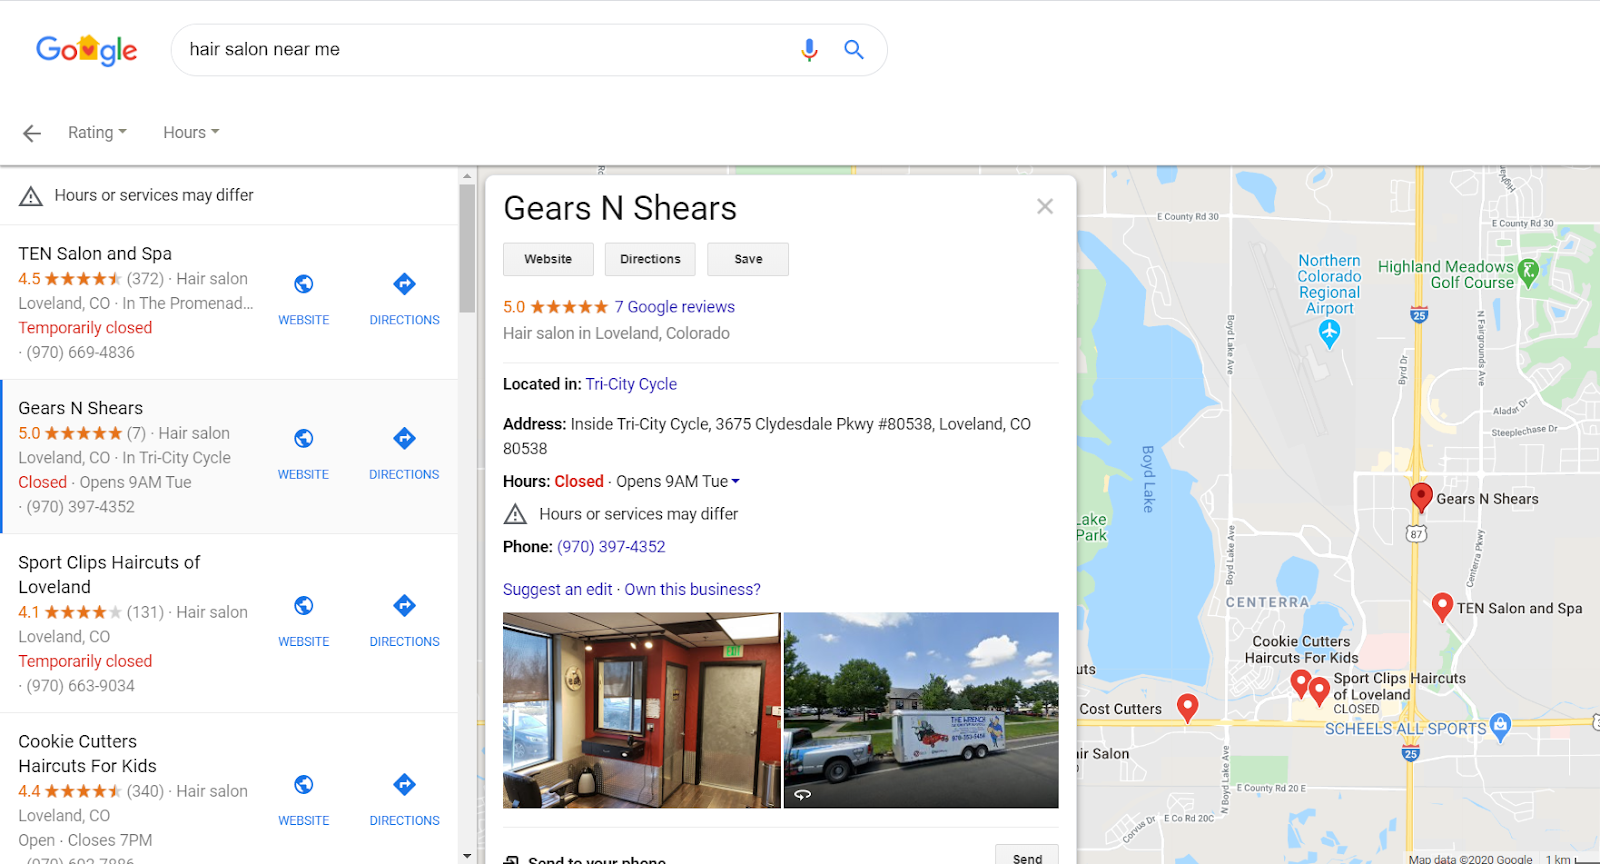 selection of one business within initial Google search, shows map and specific information for the business chosen